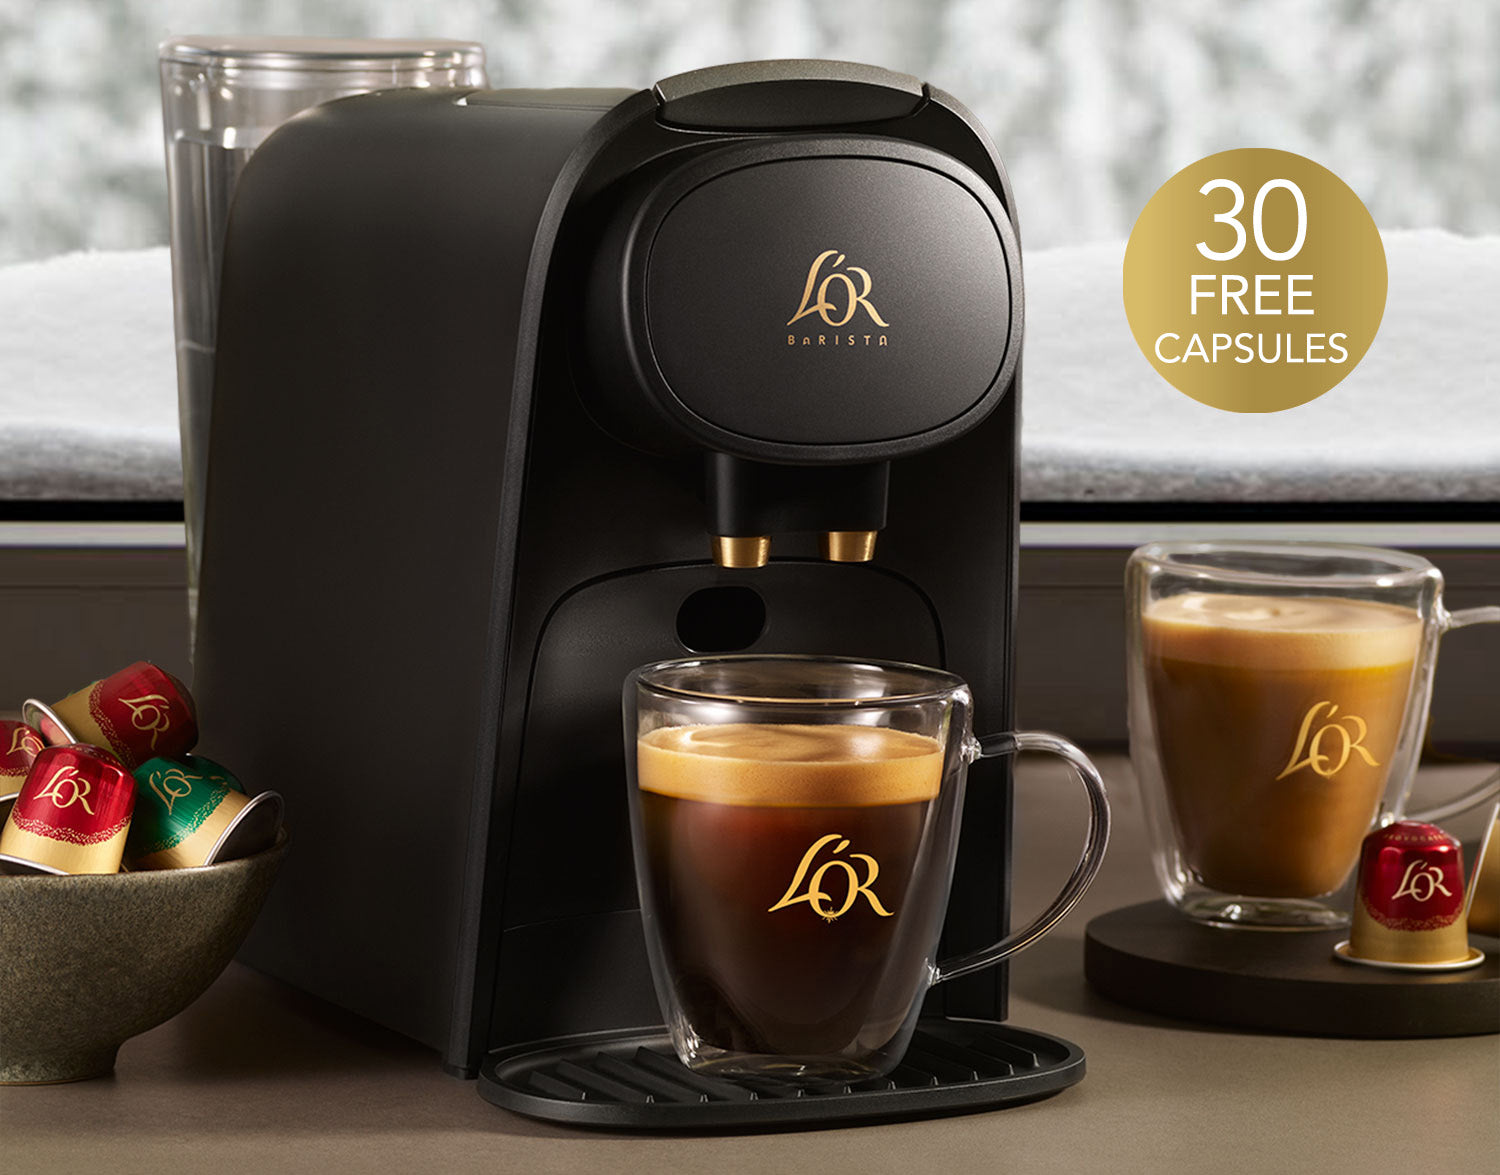 Image of L'OR BARISTA System with 30 FREE Capsules